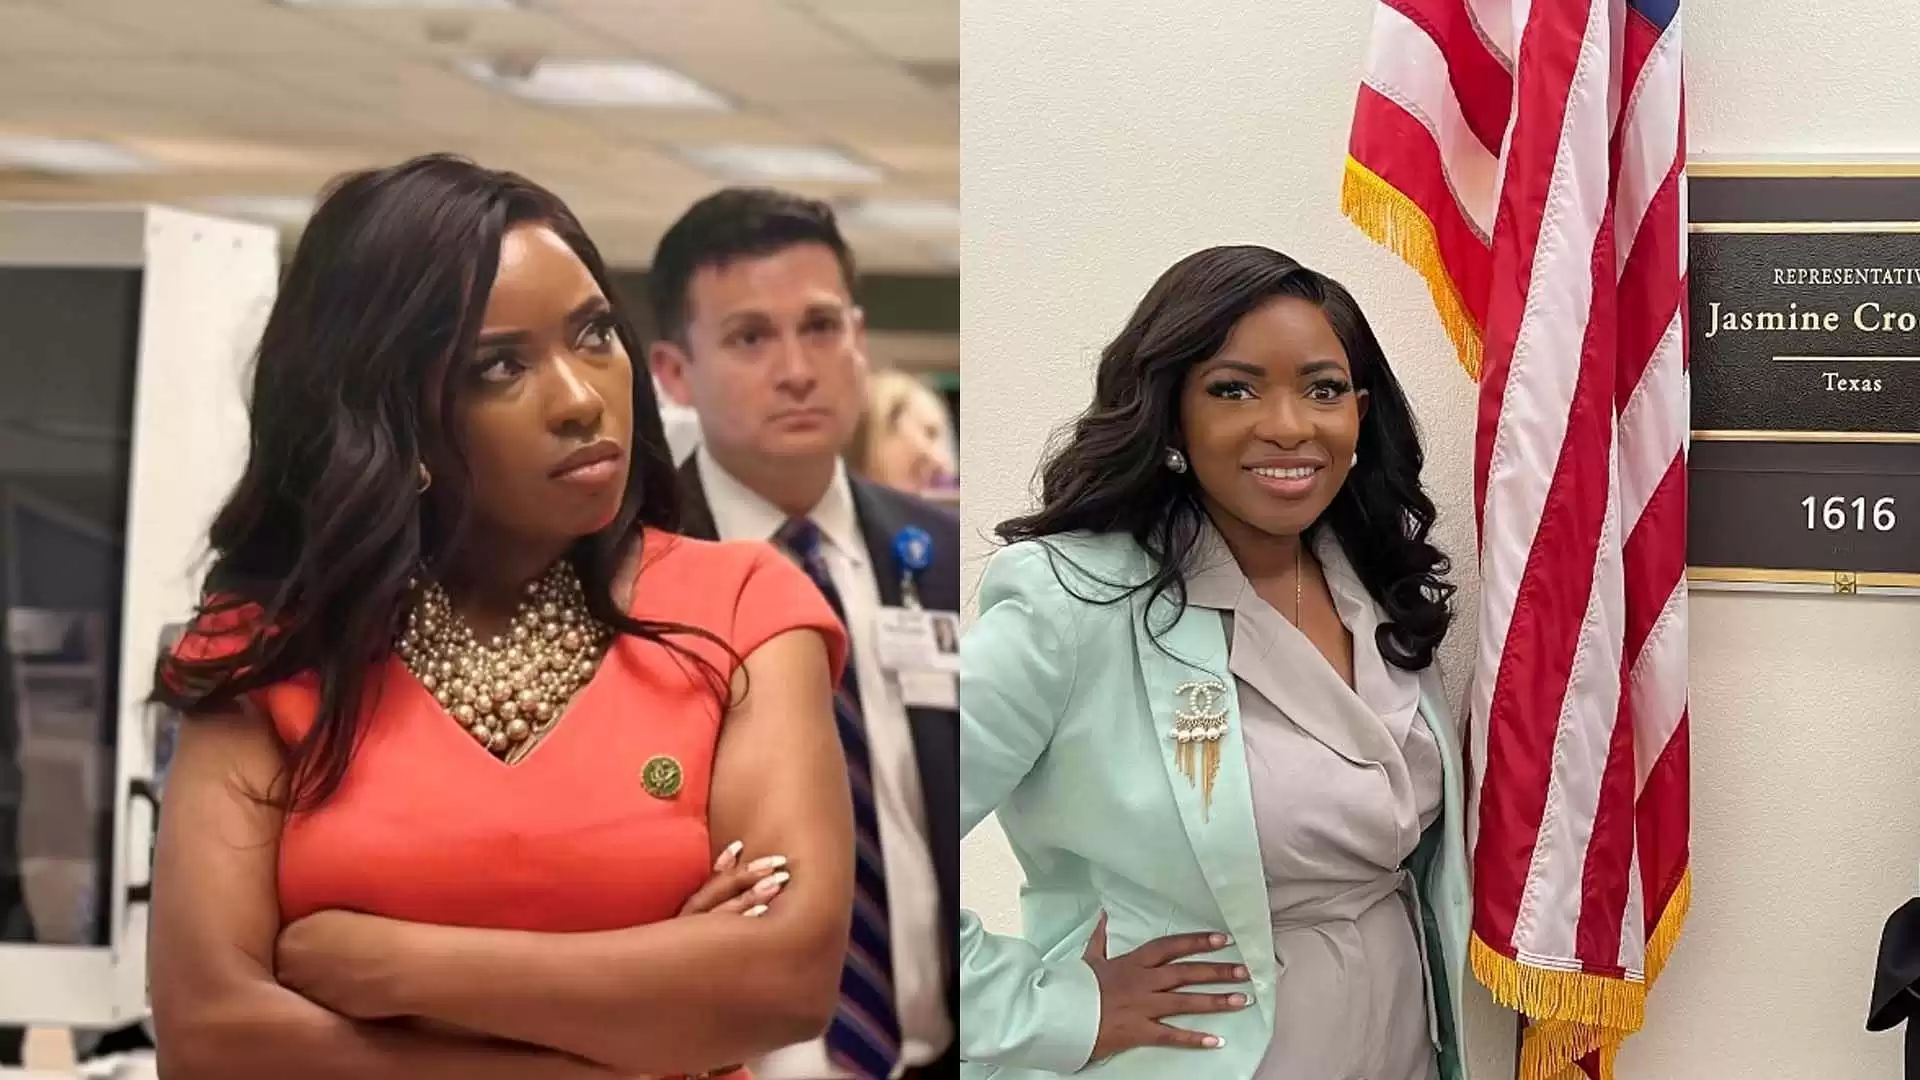 Who is Jasmine Crockett? Age, education, and all about the Congresswoman as she goes viral for roasting Republicans